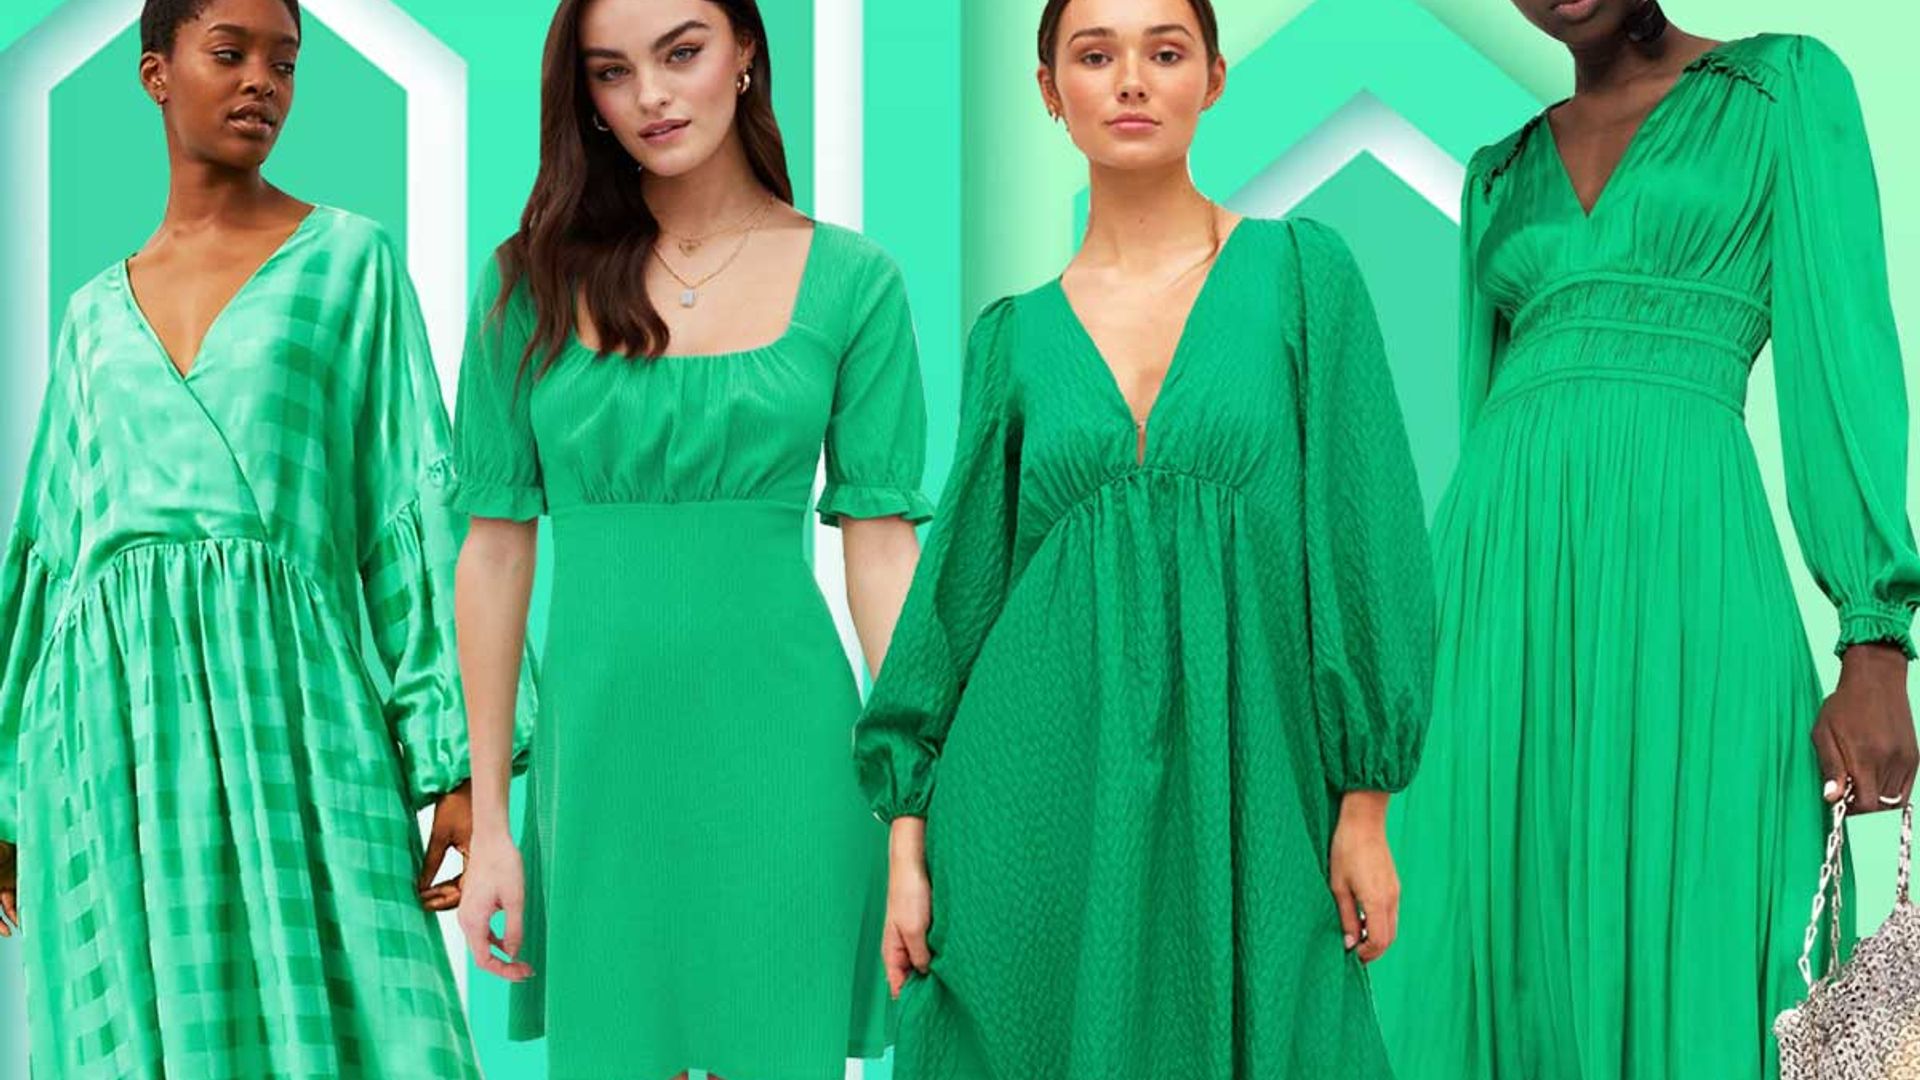 Green dresses are trending right now ...